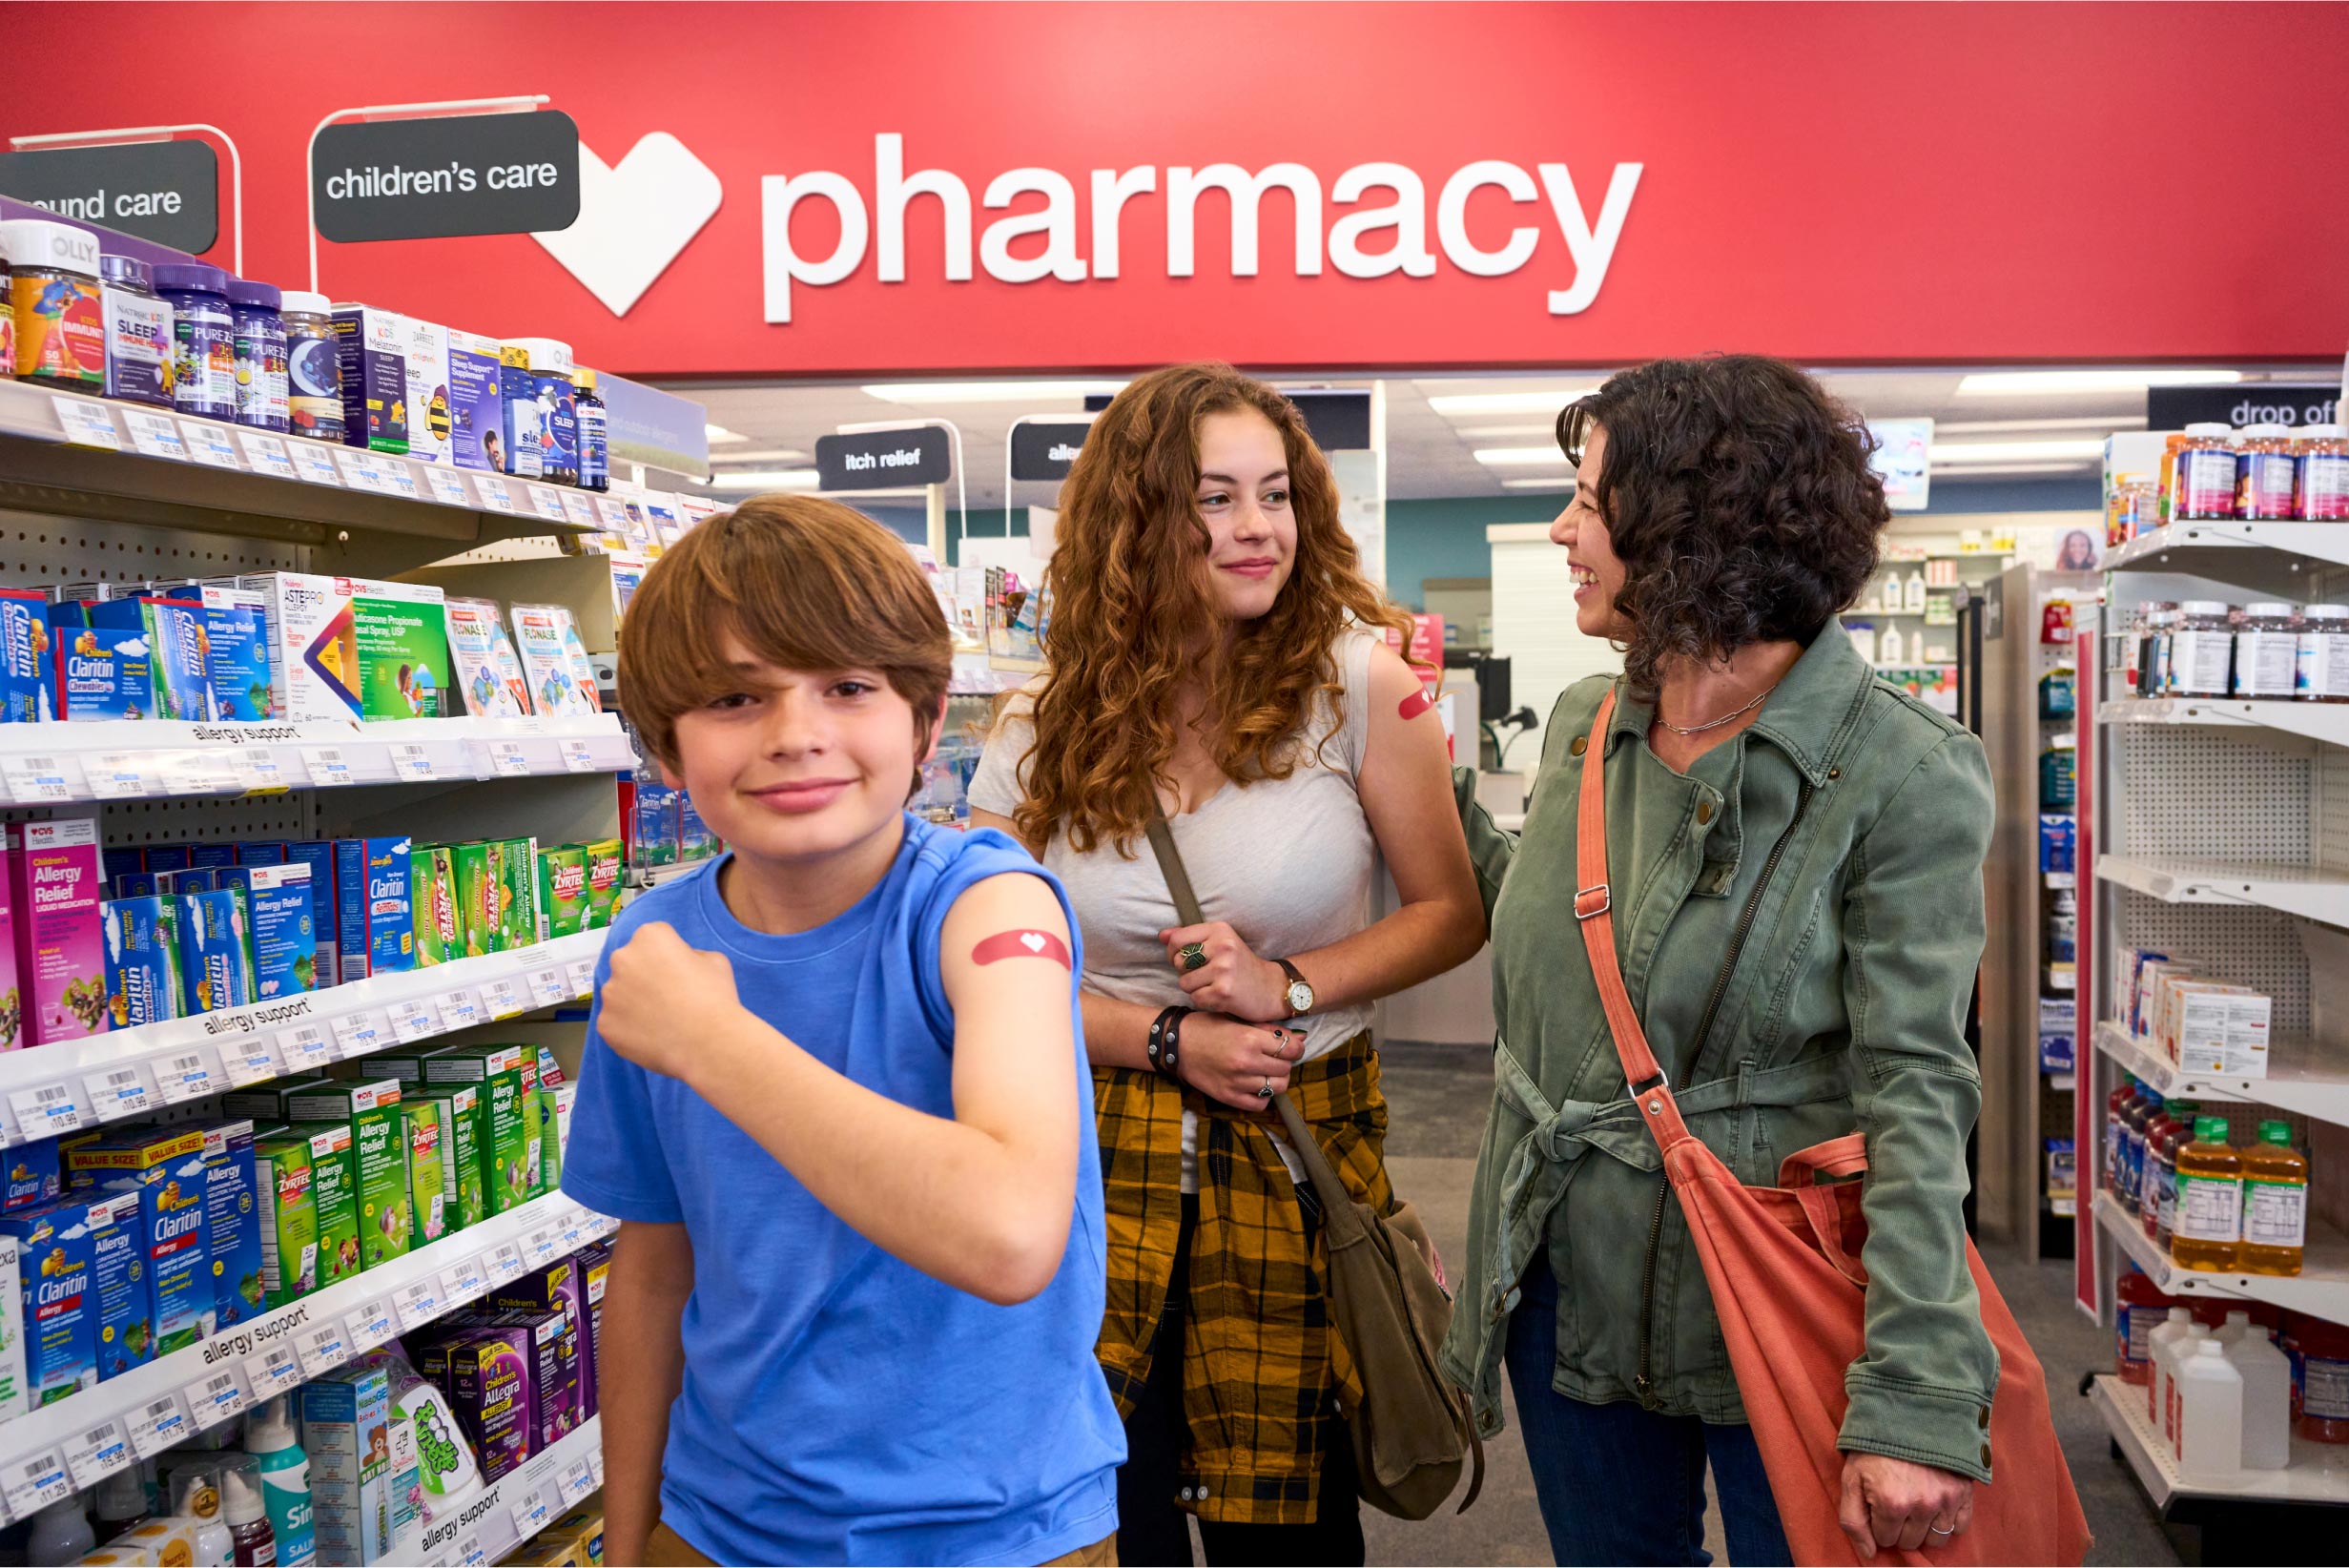 A child shows his vaccination bandage as he walks through a CVS aisle with his mother.